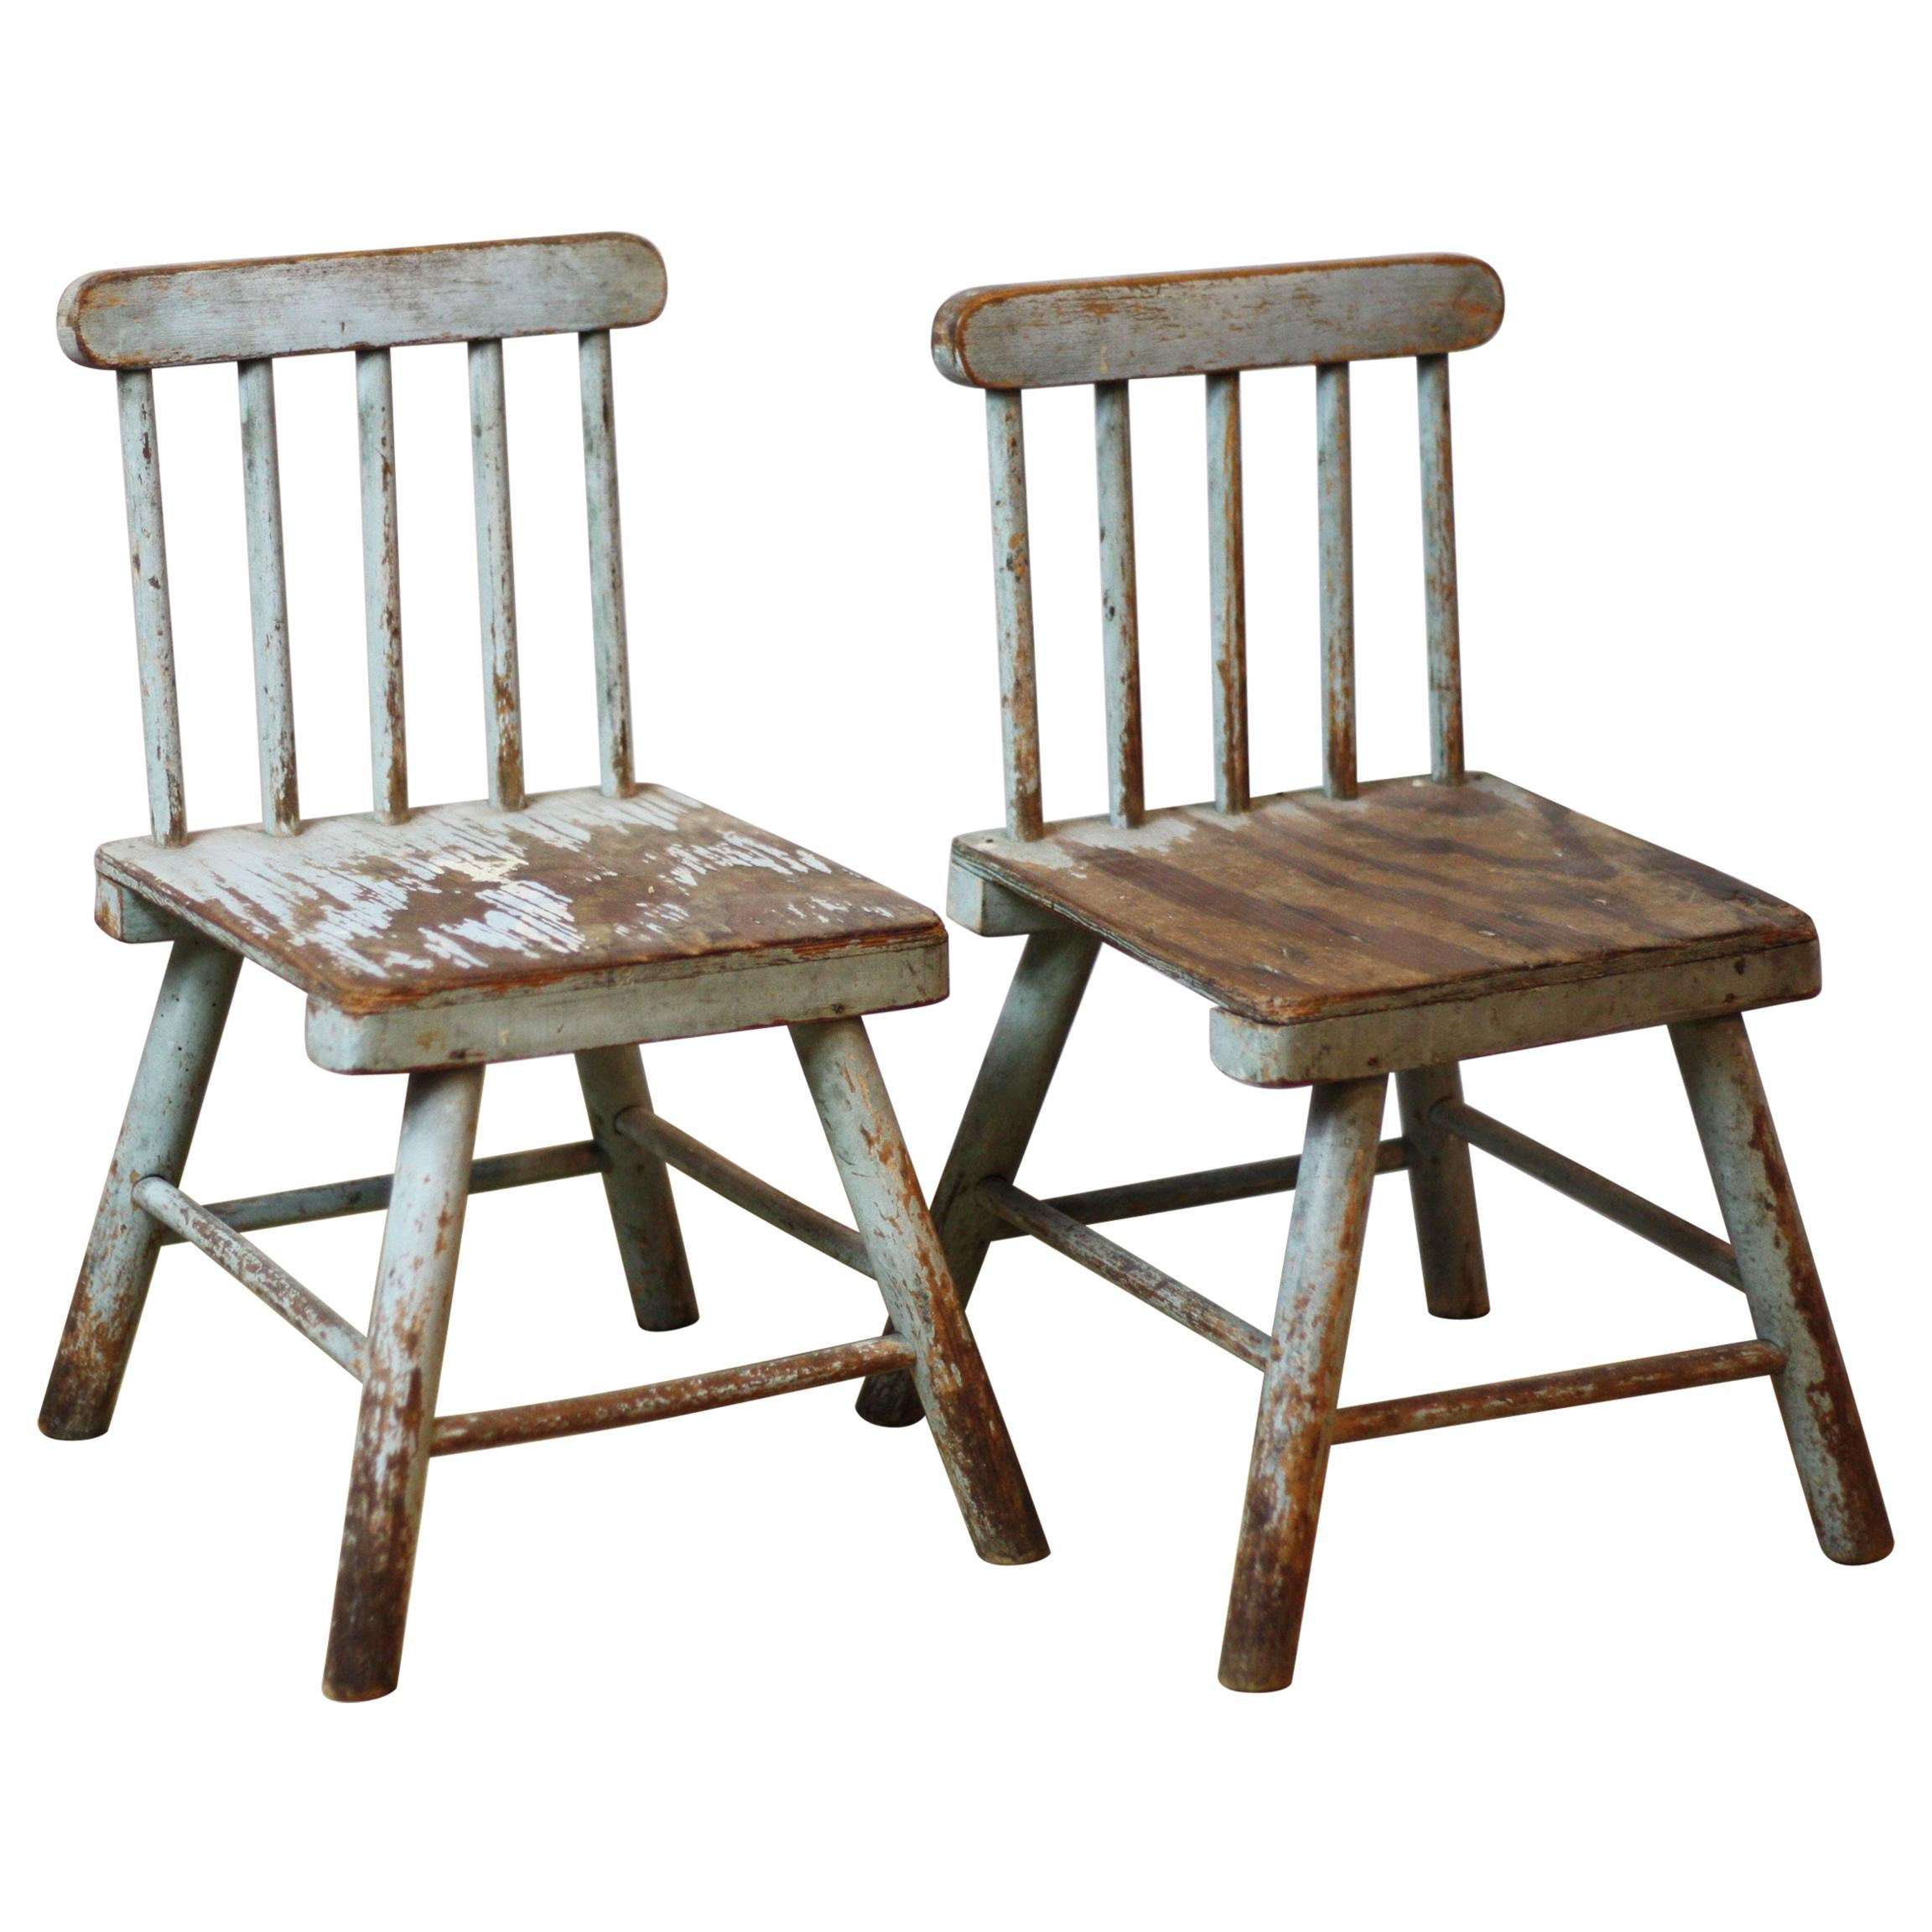 Pair of English wooden Folk Art Chairs For Sale